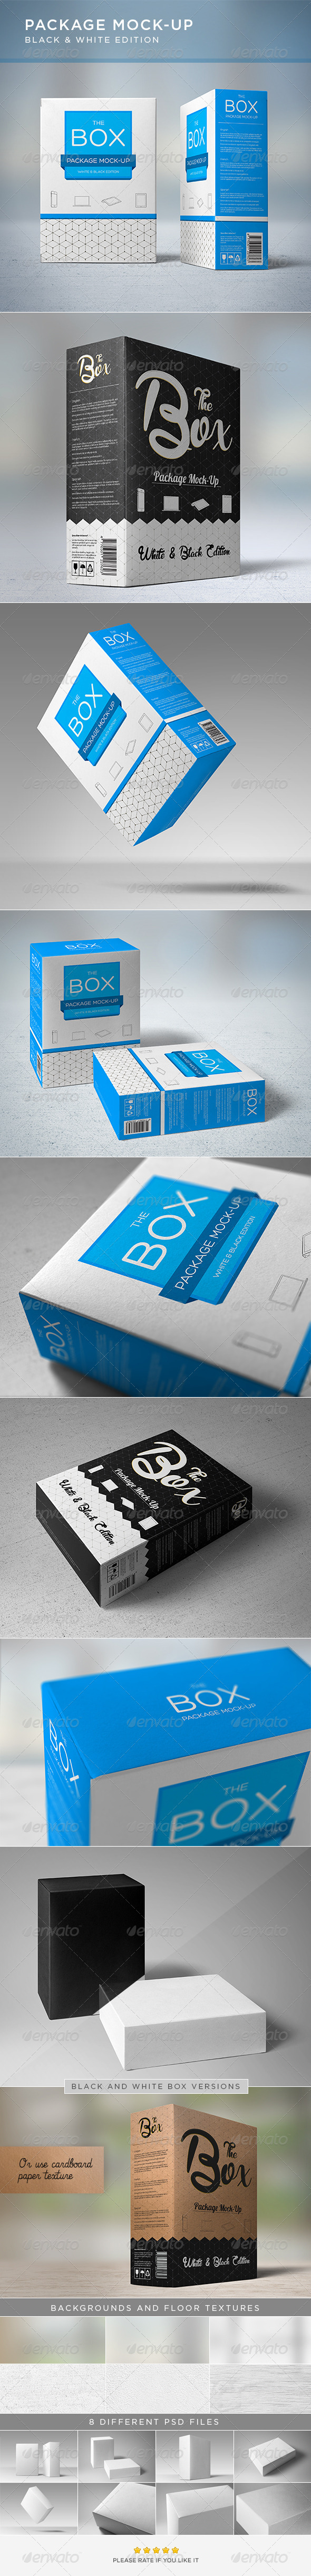 Download Package Mock Up By Genetic96 Graphicriver